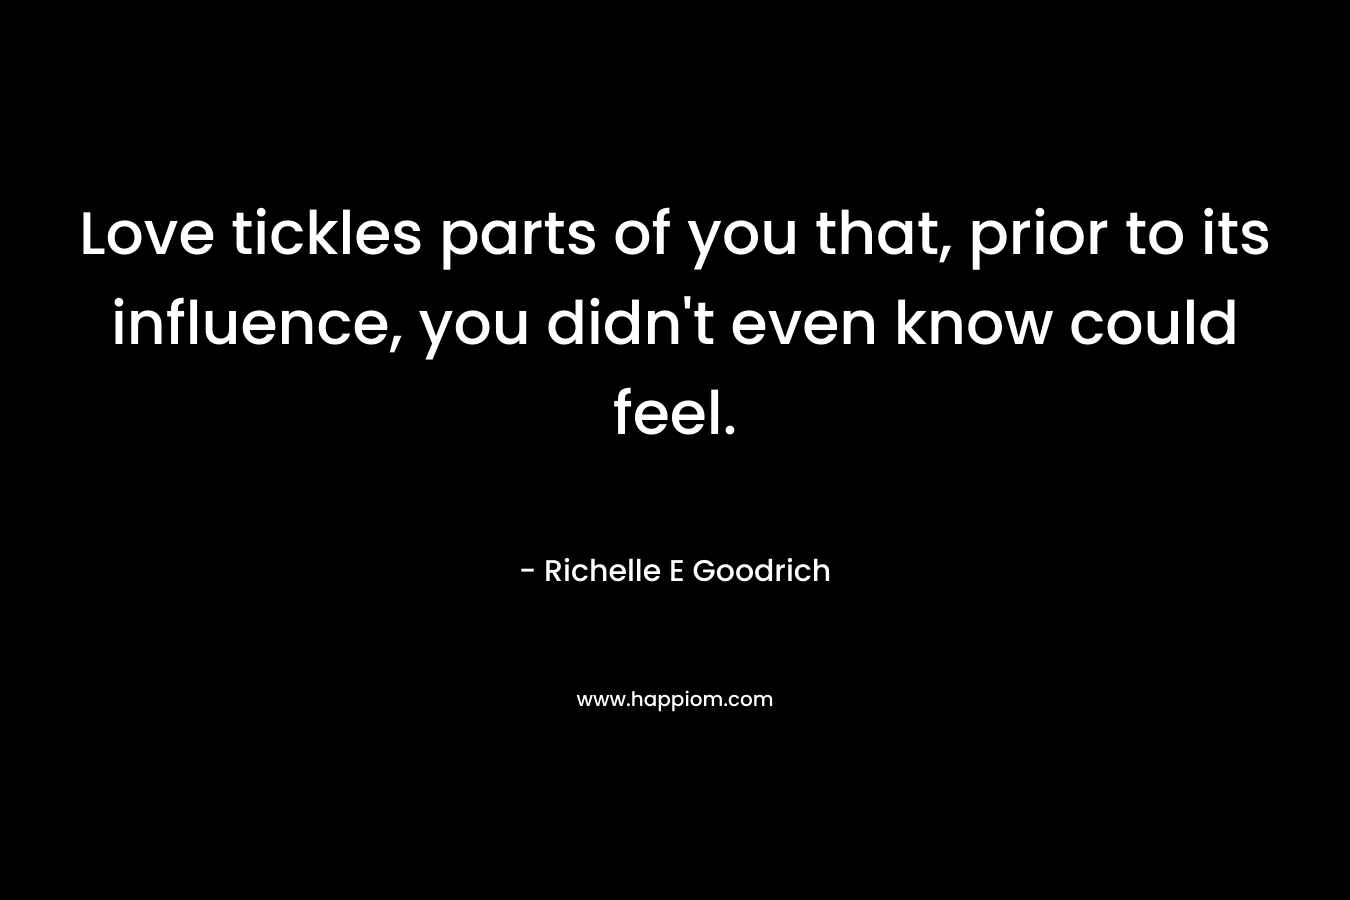 Love tickles parts of you that, prior to its influence, you didn’t even know could feel. – Richelle E Goodrich